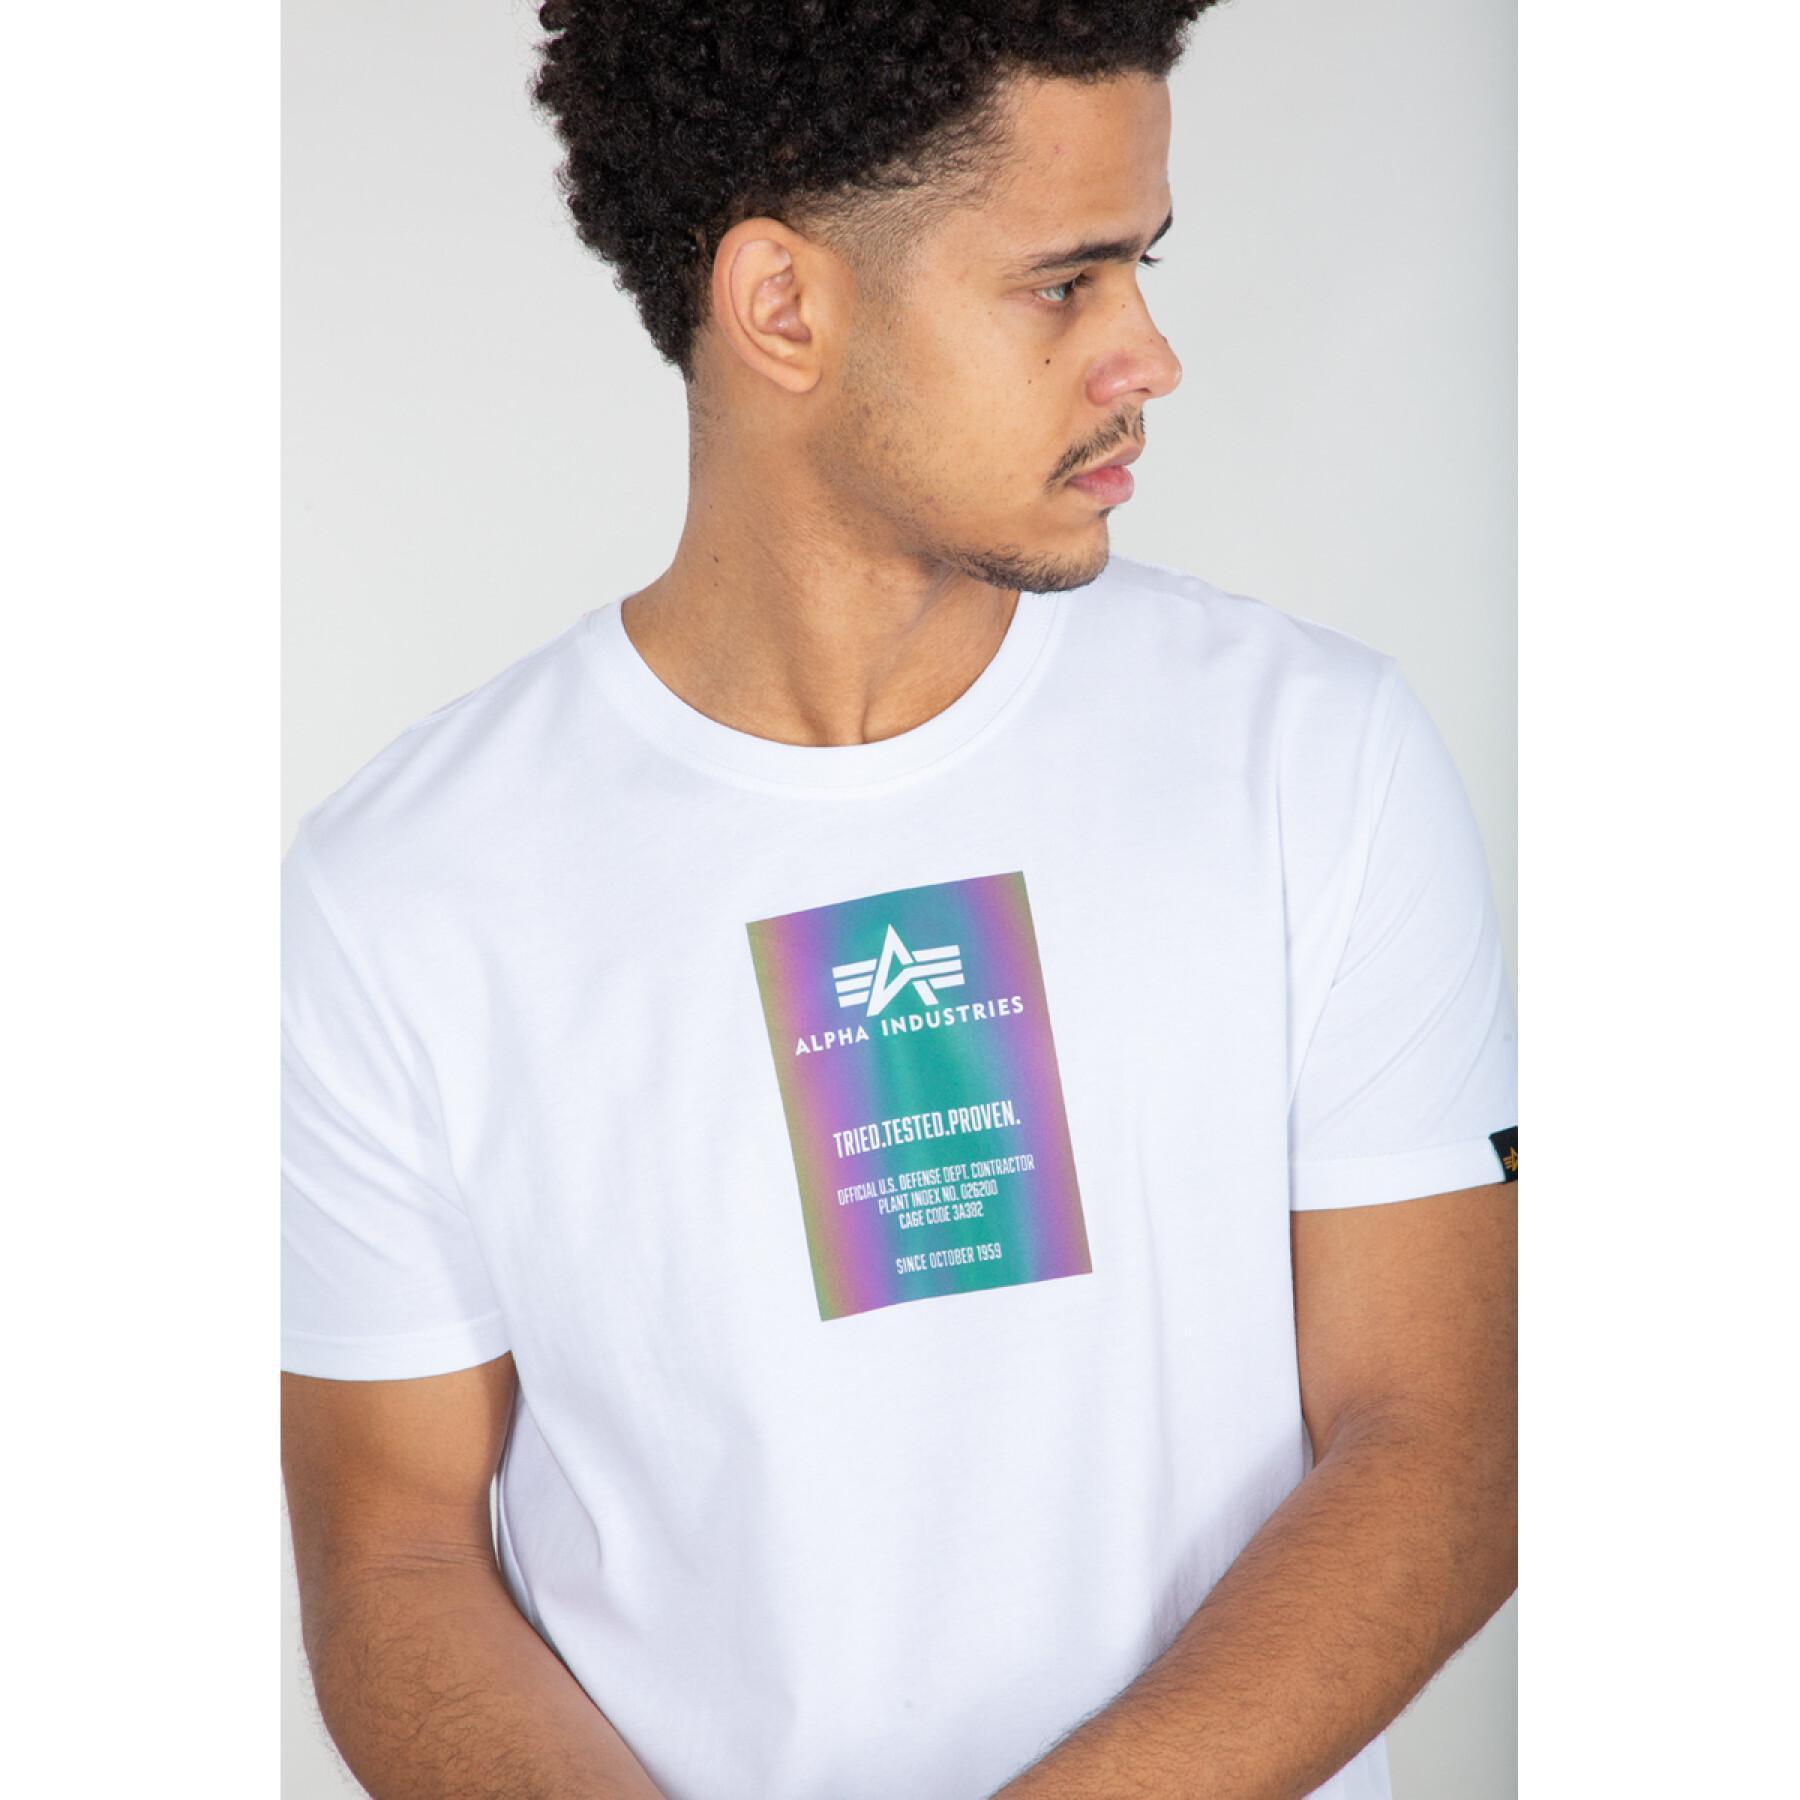 T-shirt Alpha Industries Rainbow T-shirts Lifestyle - and Reflective Polo Man Label shirts - 